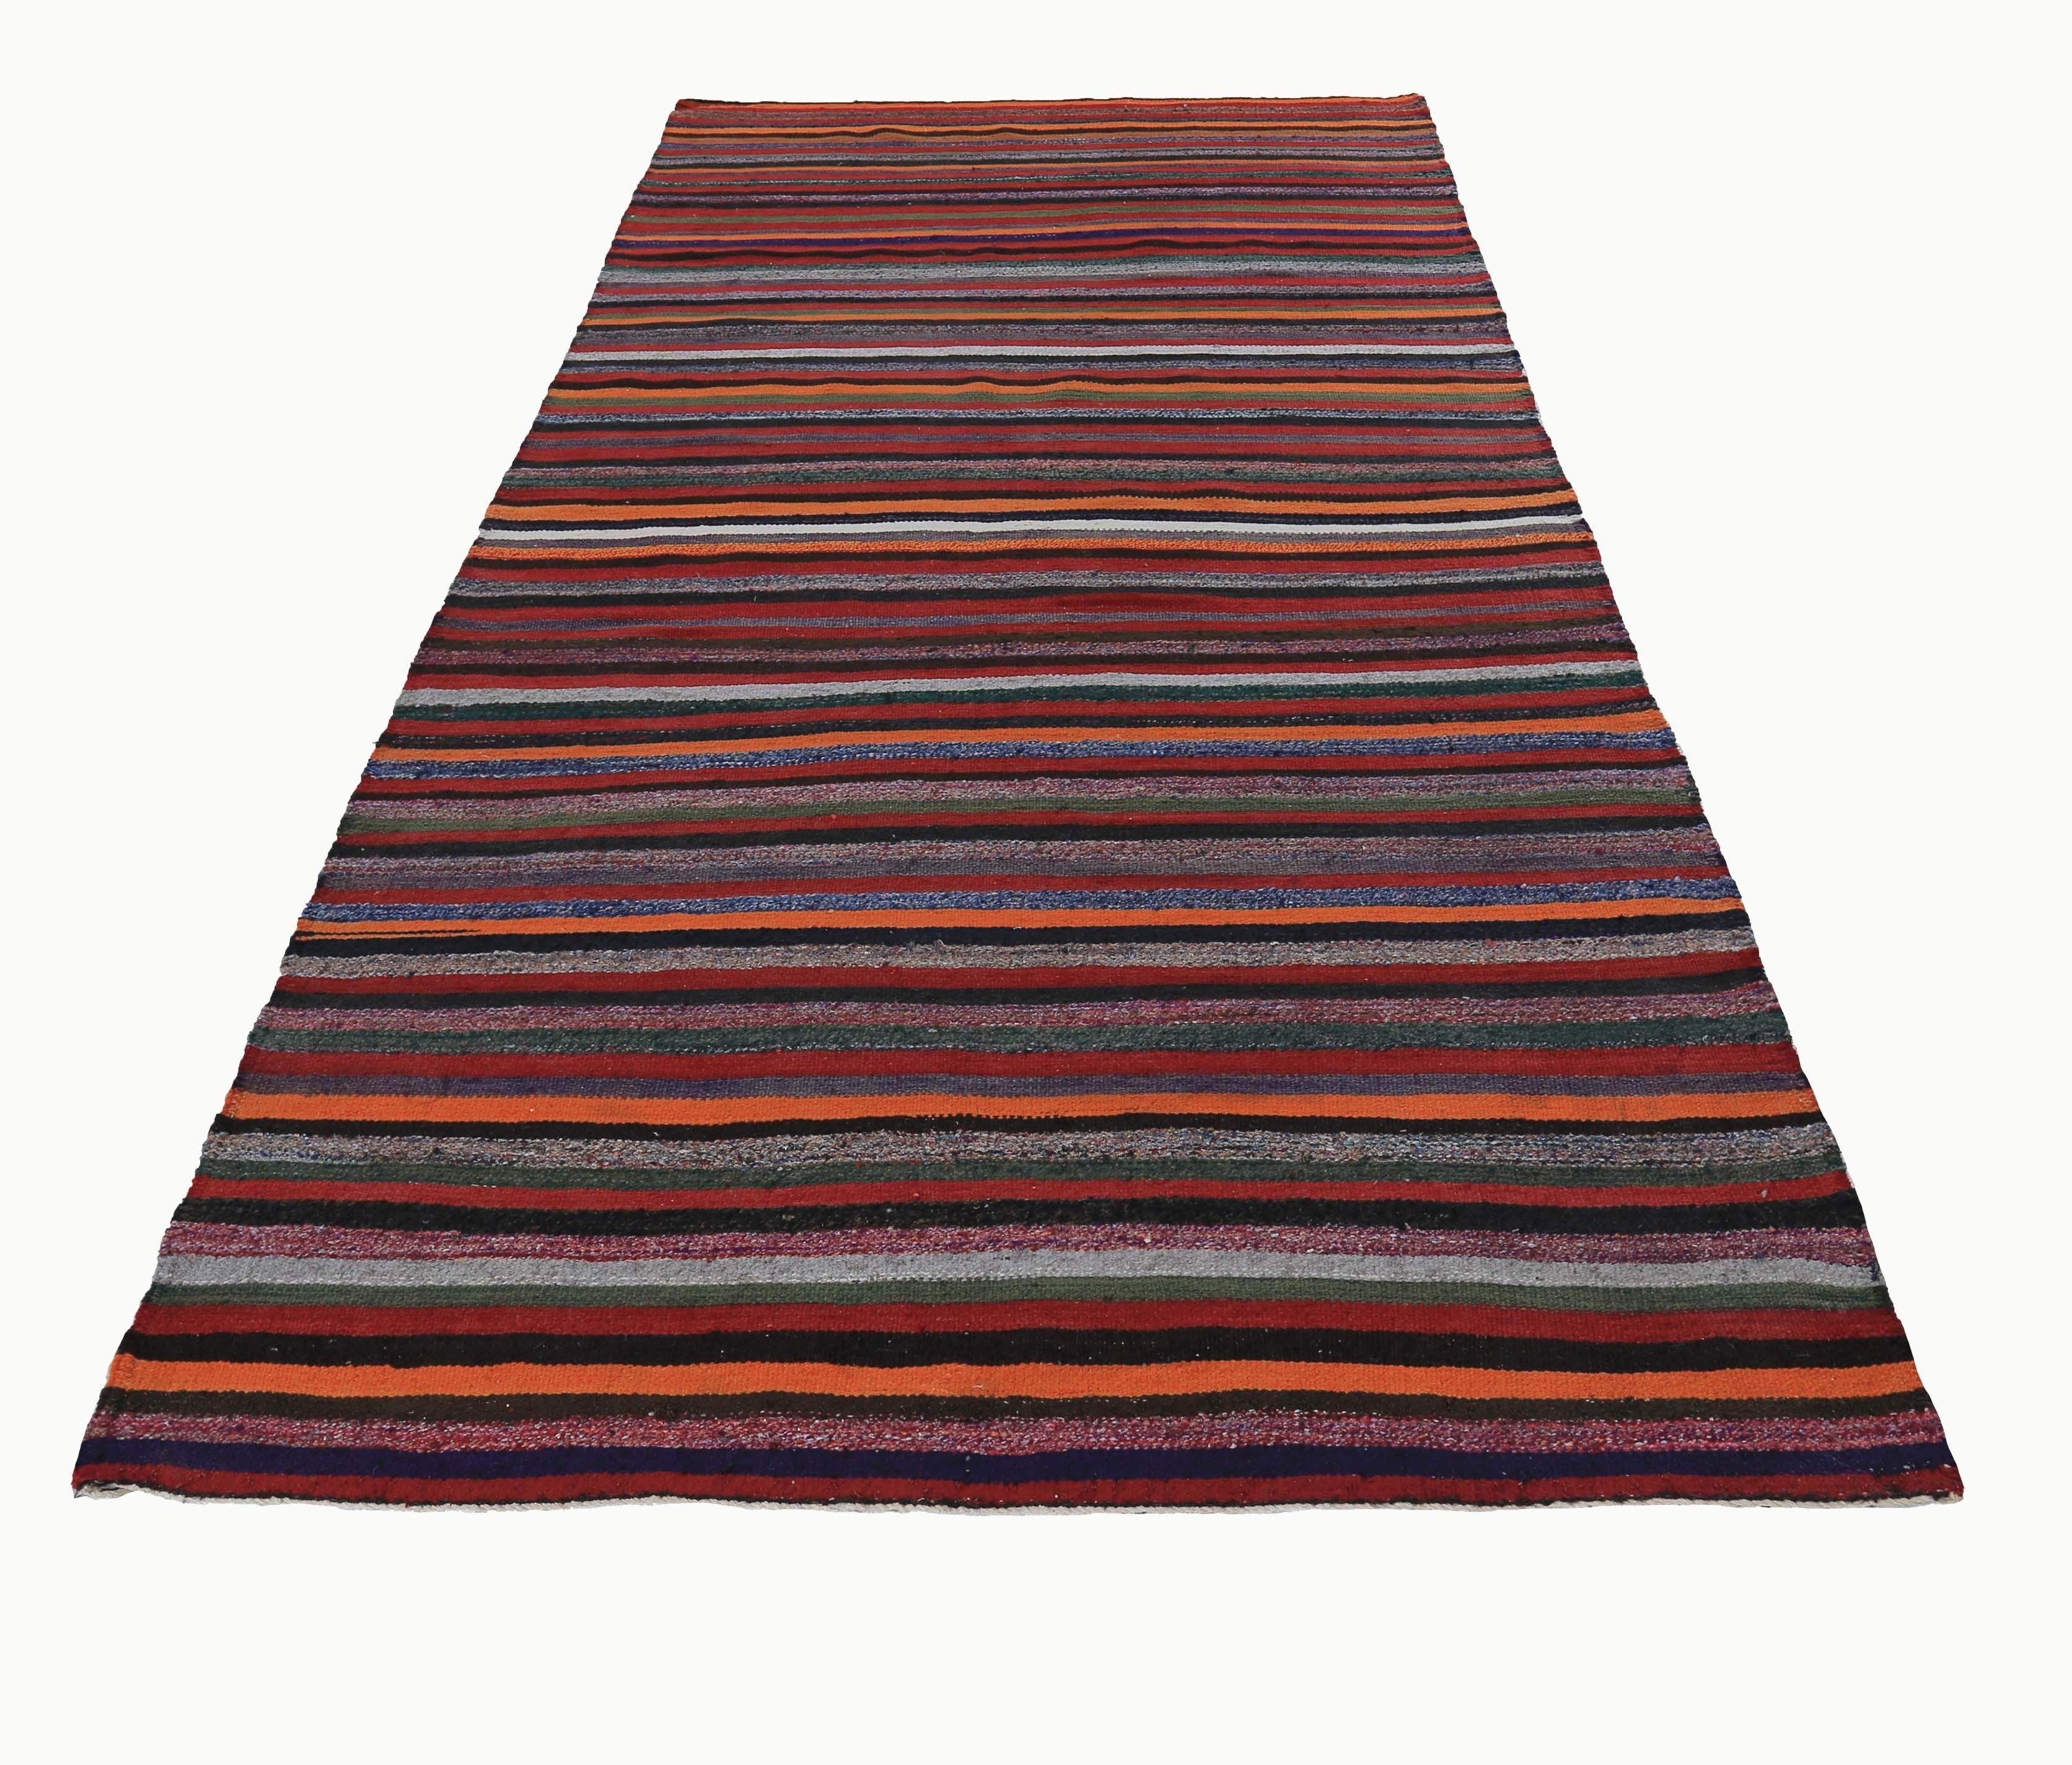 Turkish rug handwoven from the finest sheep’s wool and colored with all-natural vegetable dyes that are safe for humans and pets. It’s a traditional Kilim flat-weave design featuring tribal stripes in various colors. It’s a stunning piece to get for